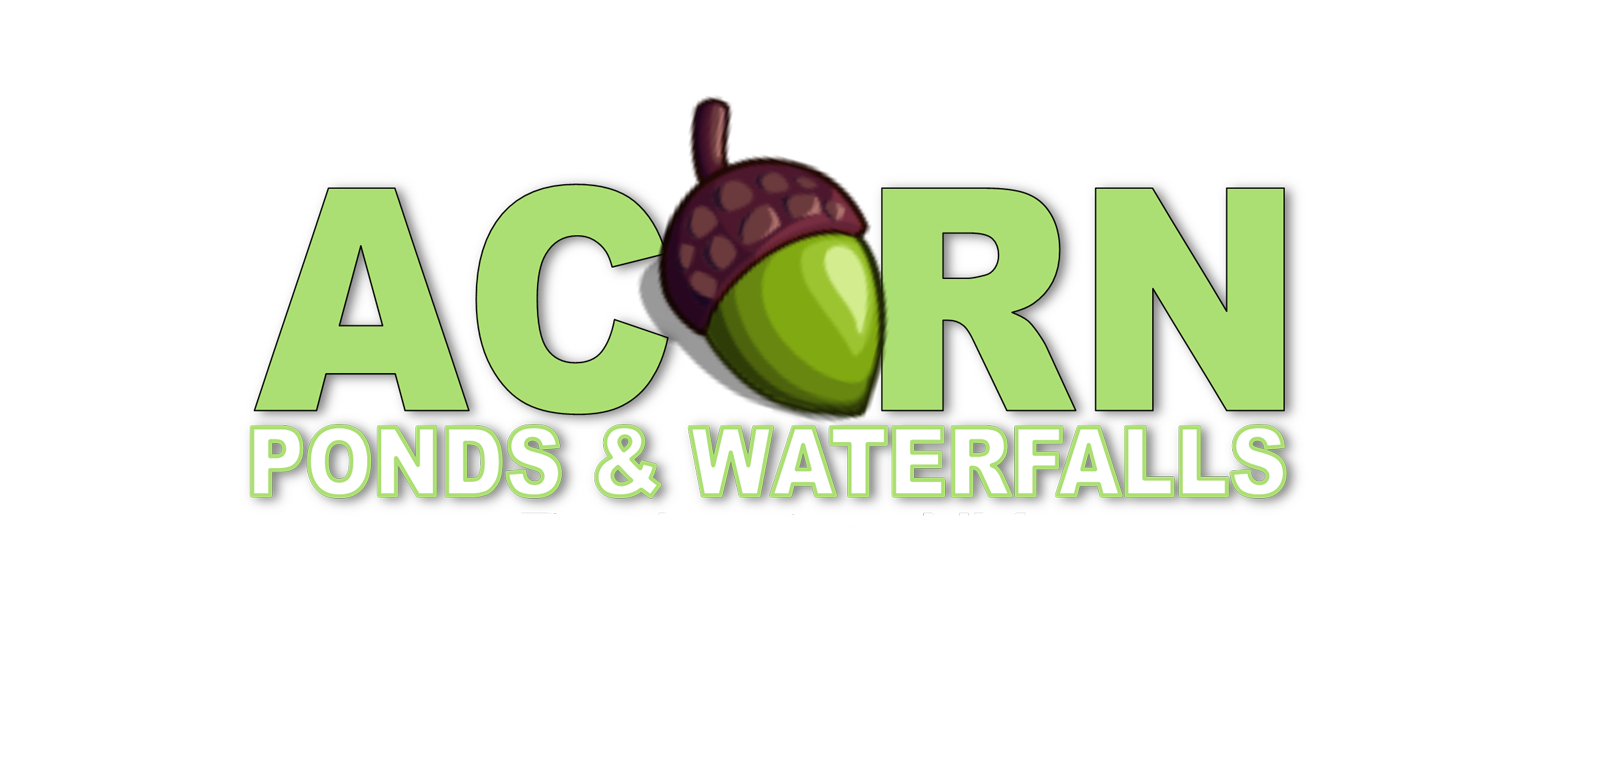 Acorn’s Pond-Water Feature Service In Rochester Monroe County New York (NY) Near Me